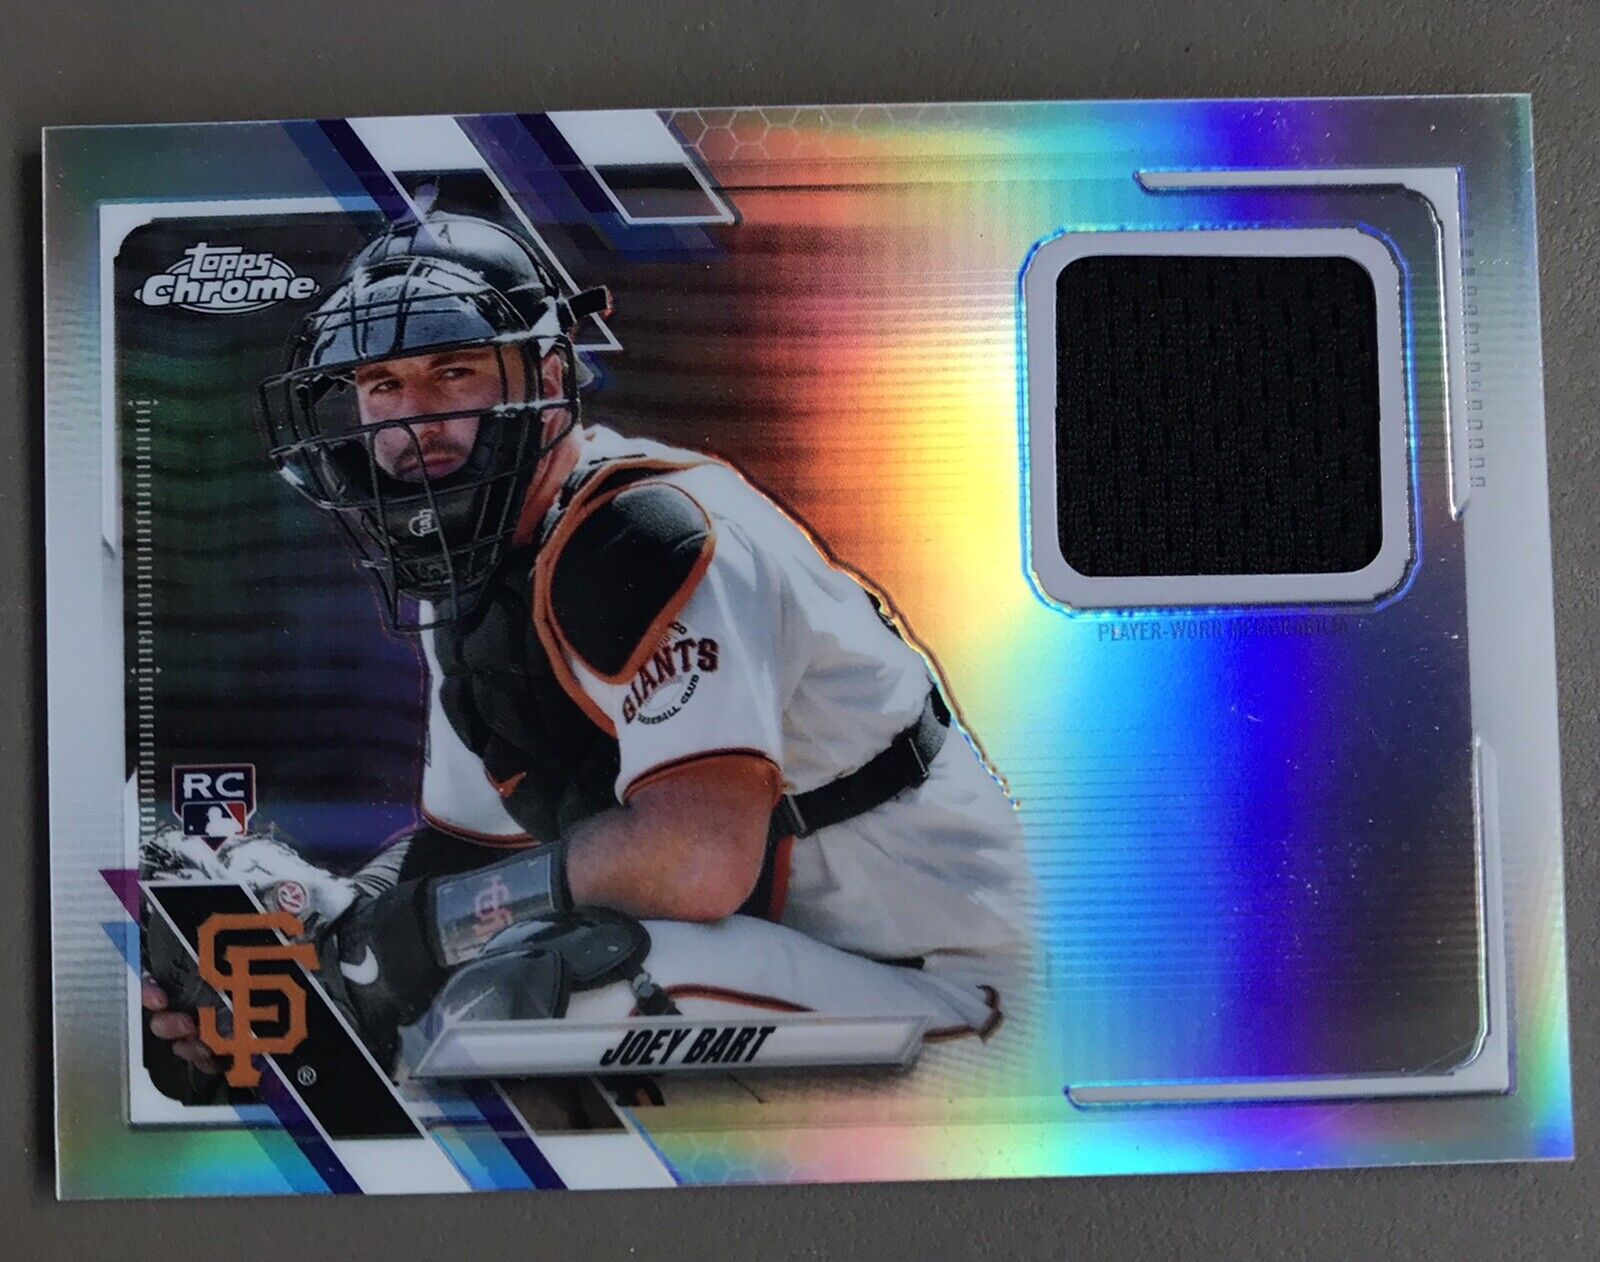 2021 Topps Chrome ROOKIE Joey Bart SP RC Patch Relic GIANTS | eBay